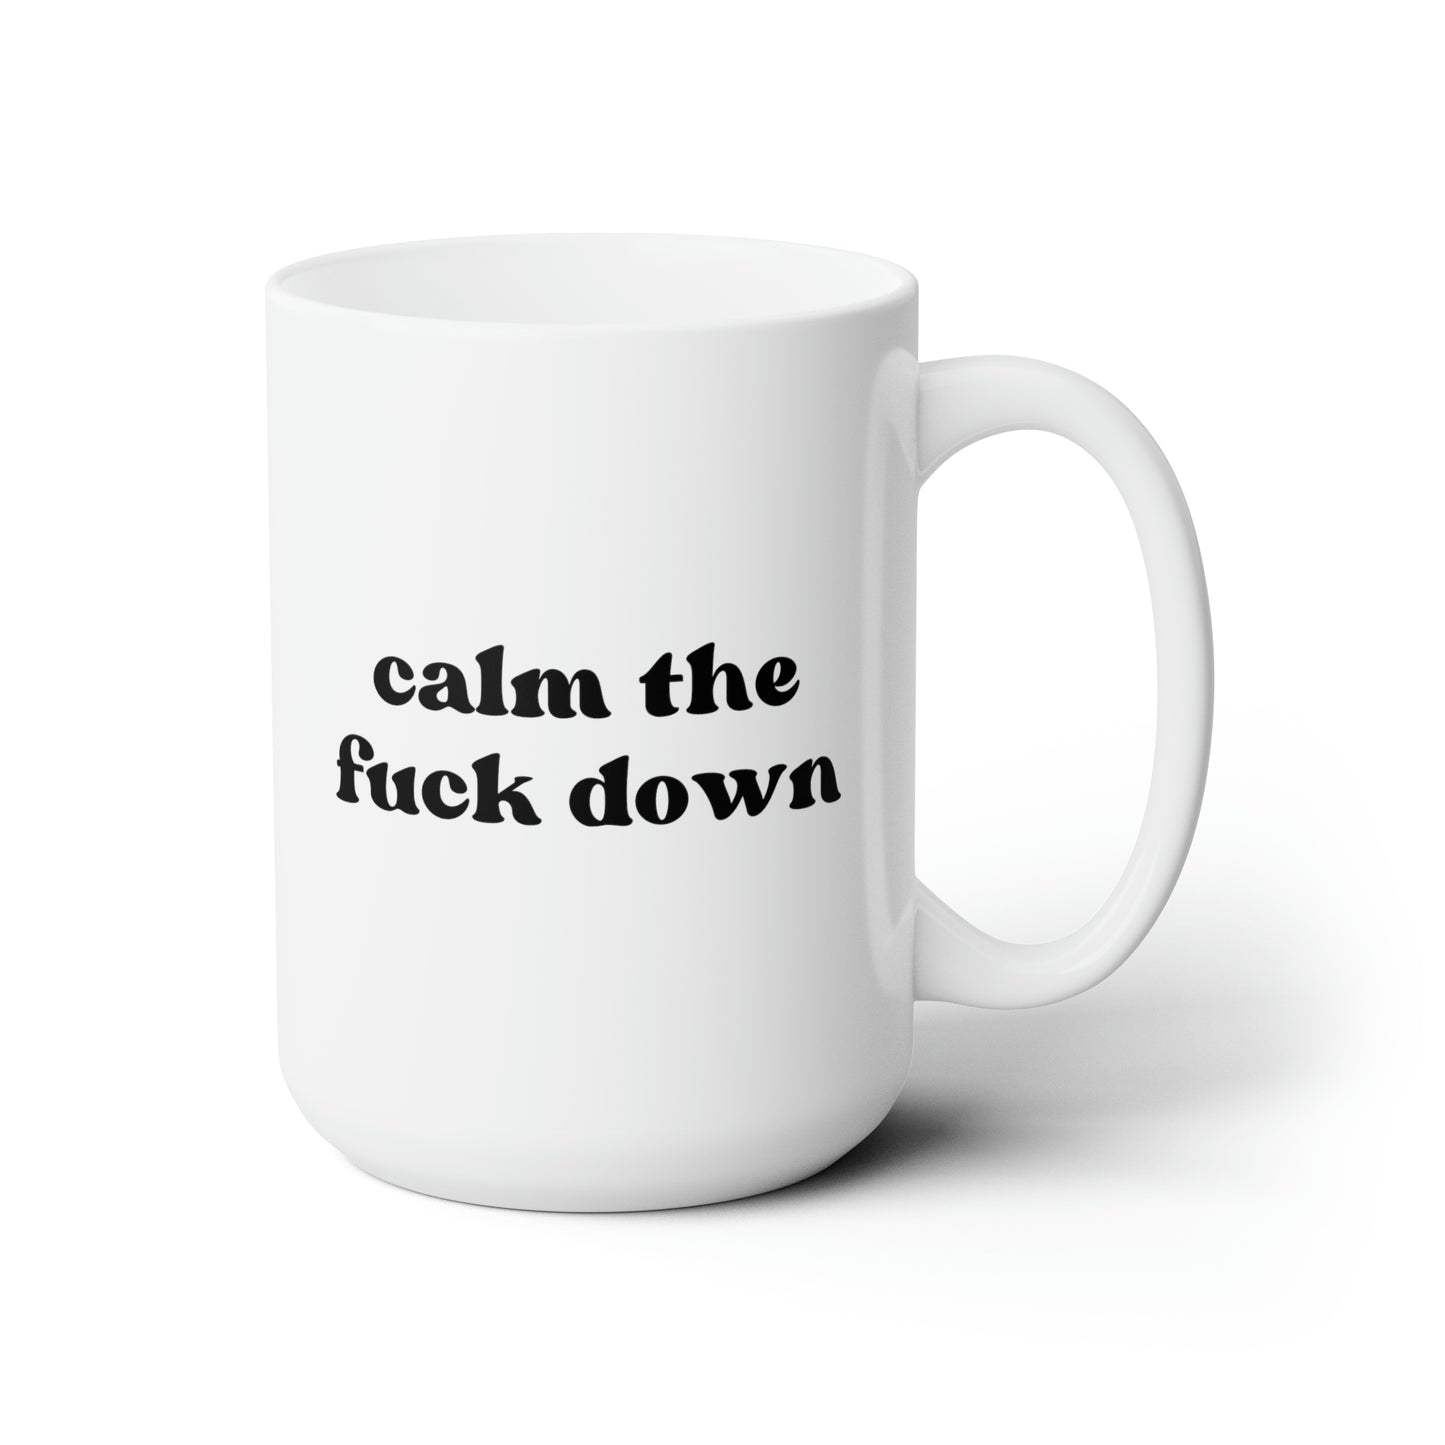 Calm The Fuck Down 15oz white funny large coffee mug gift for him her friend relax anxiety stress reliever mental health rude curse waveywares wavey wares wavywares wavy wares